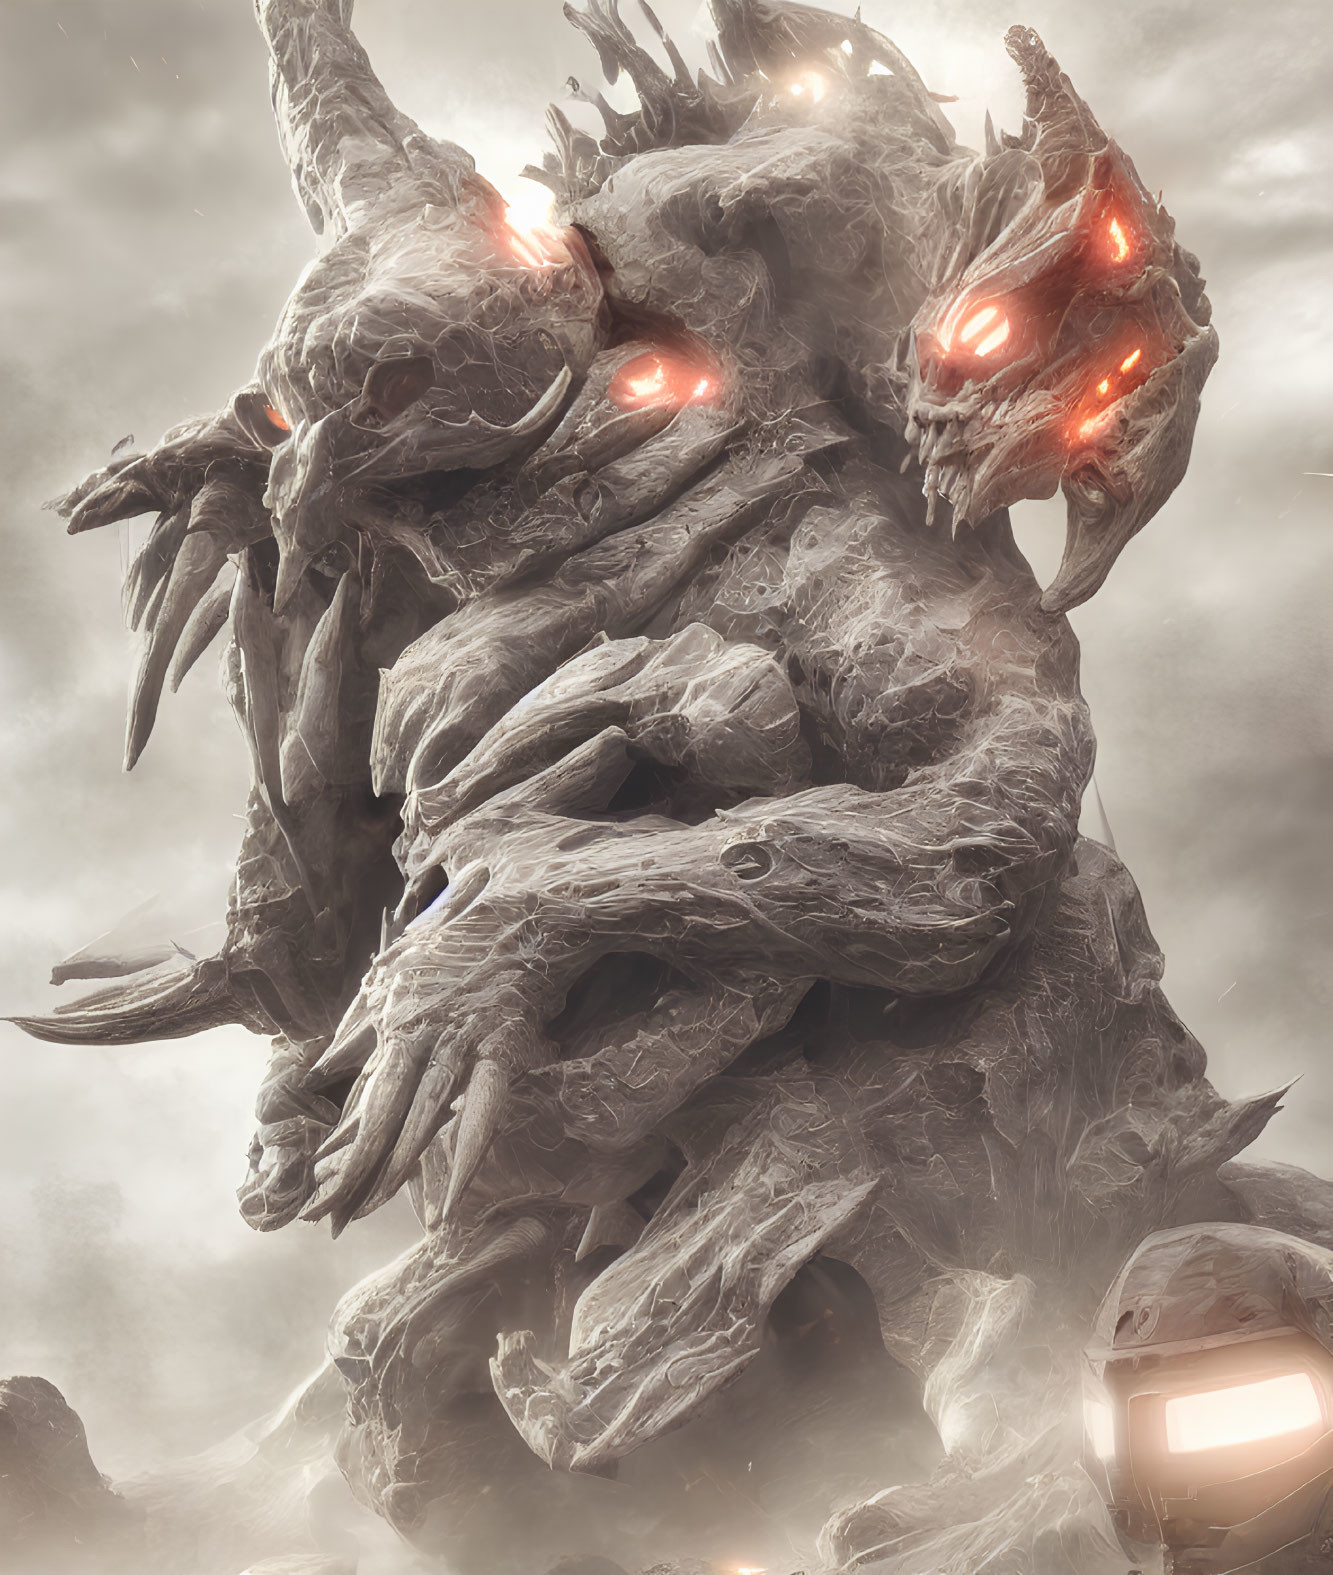 Giant stone dragon with glowing red eyes in swirling clouds